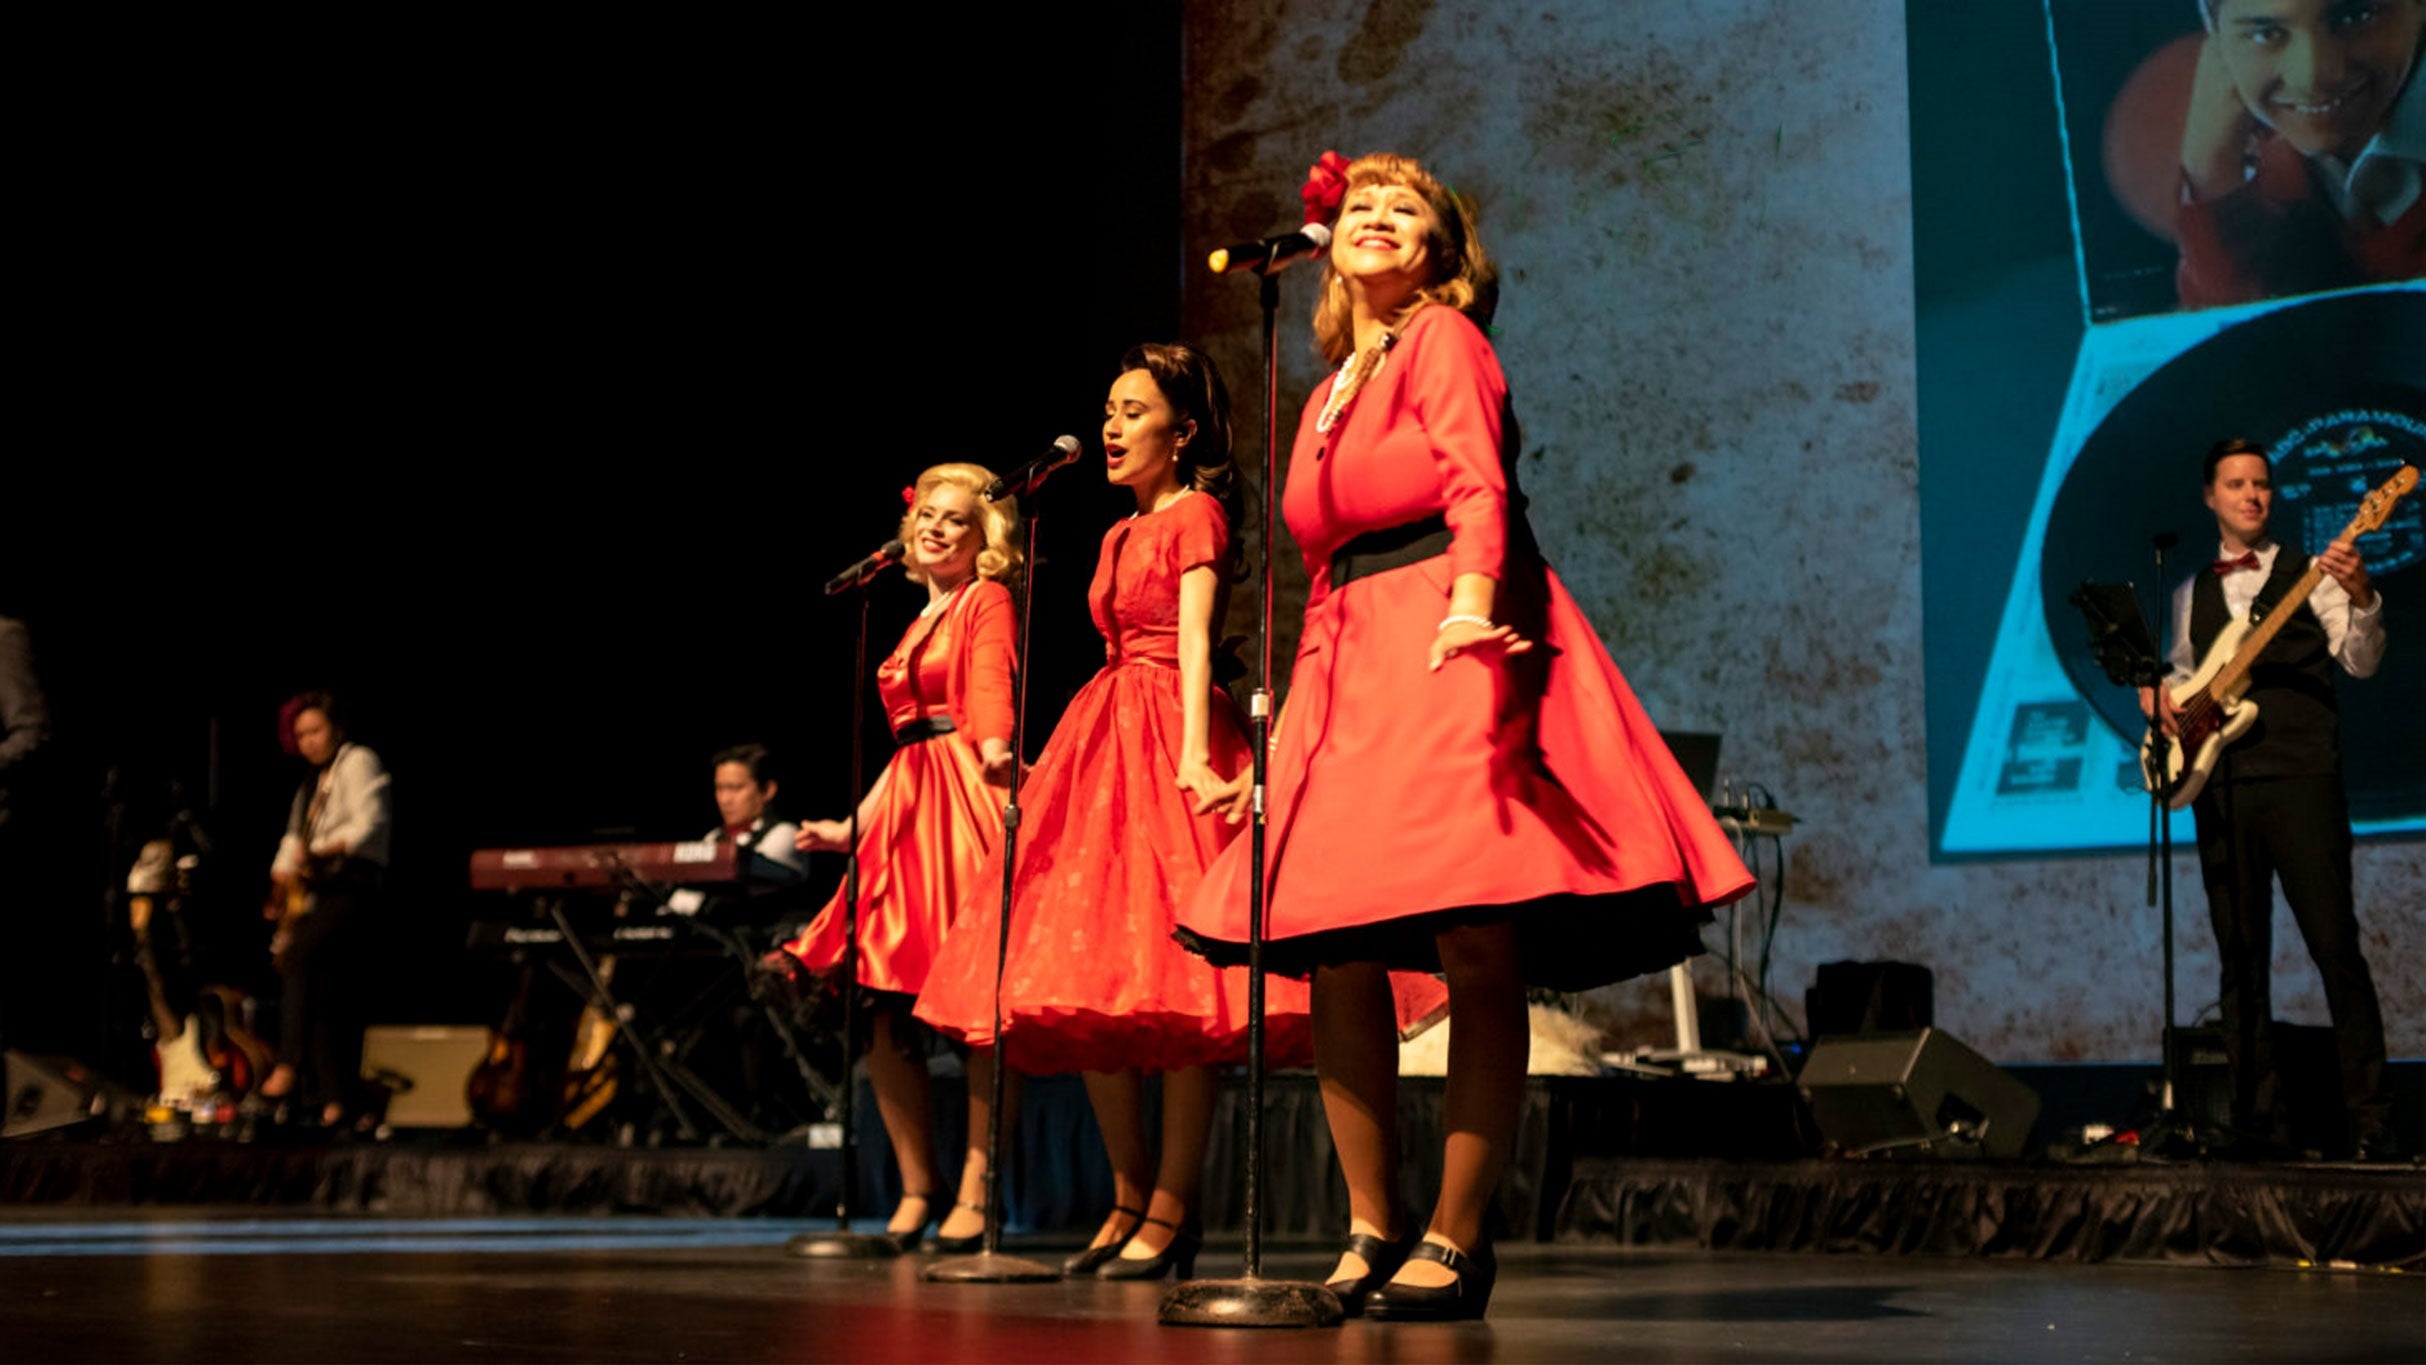 Relive The Music - 50s & 60s Show at Neptune Theatre